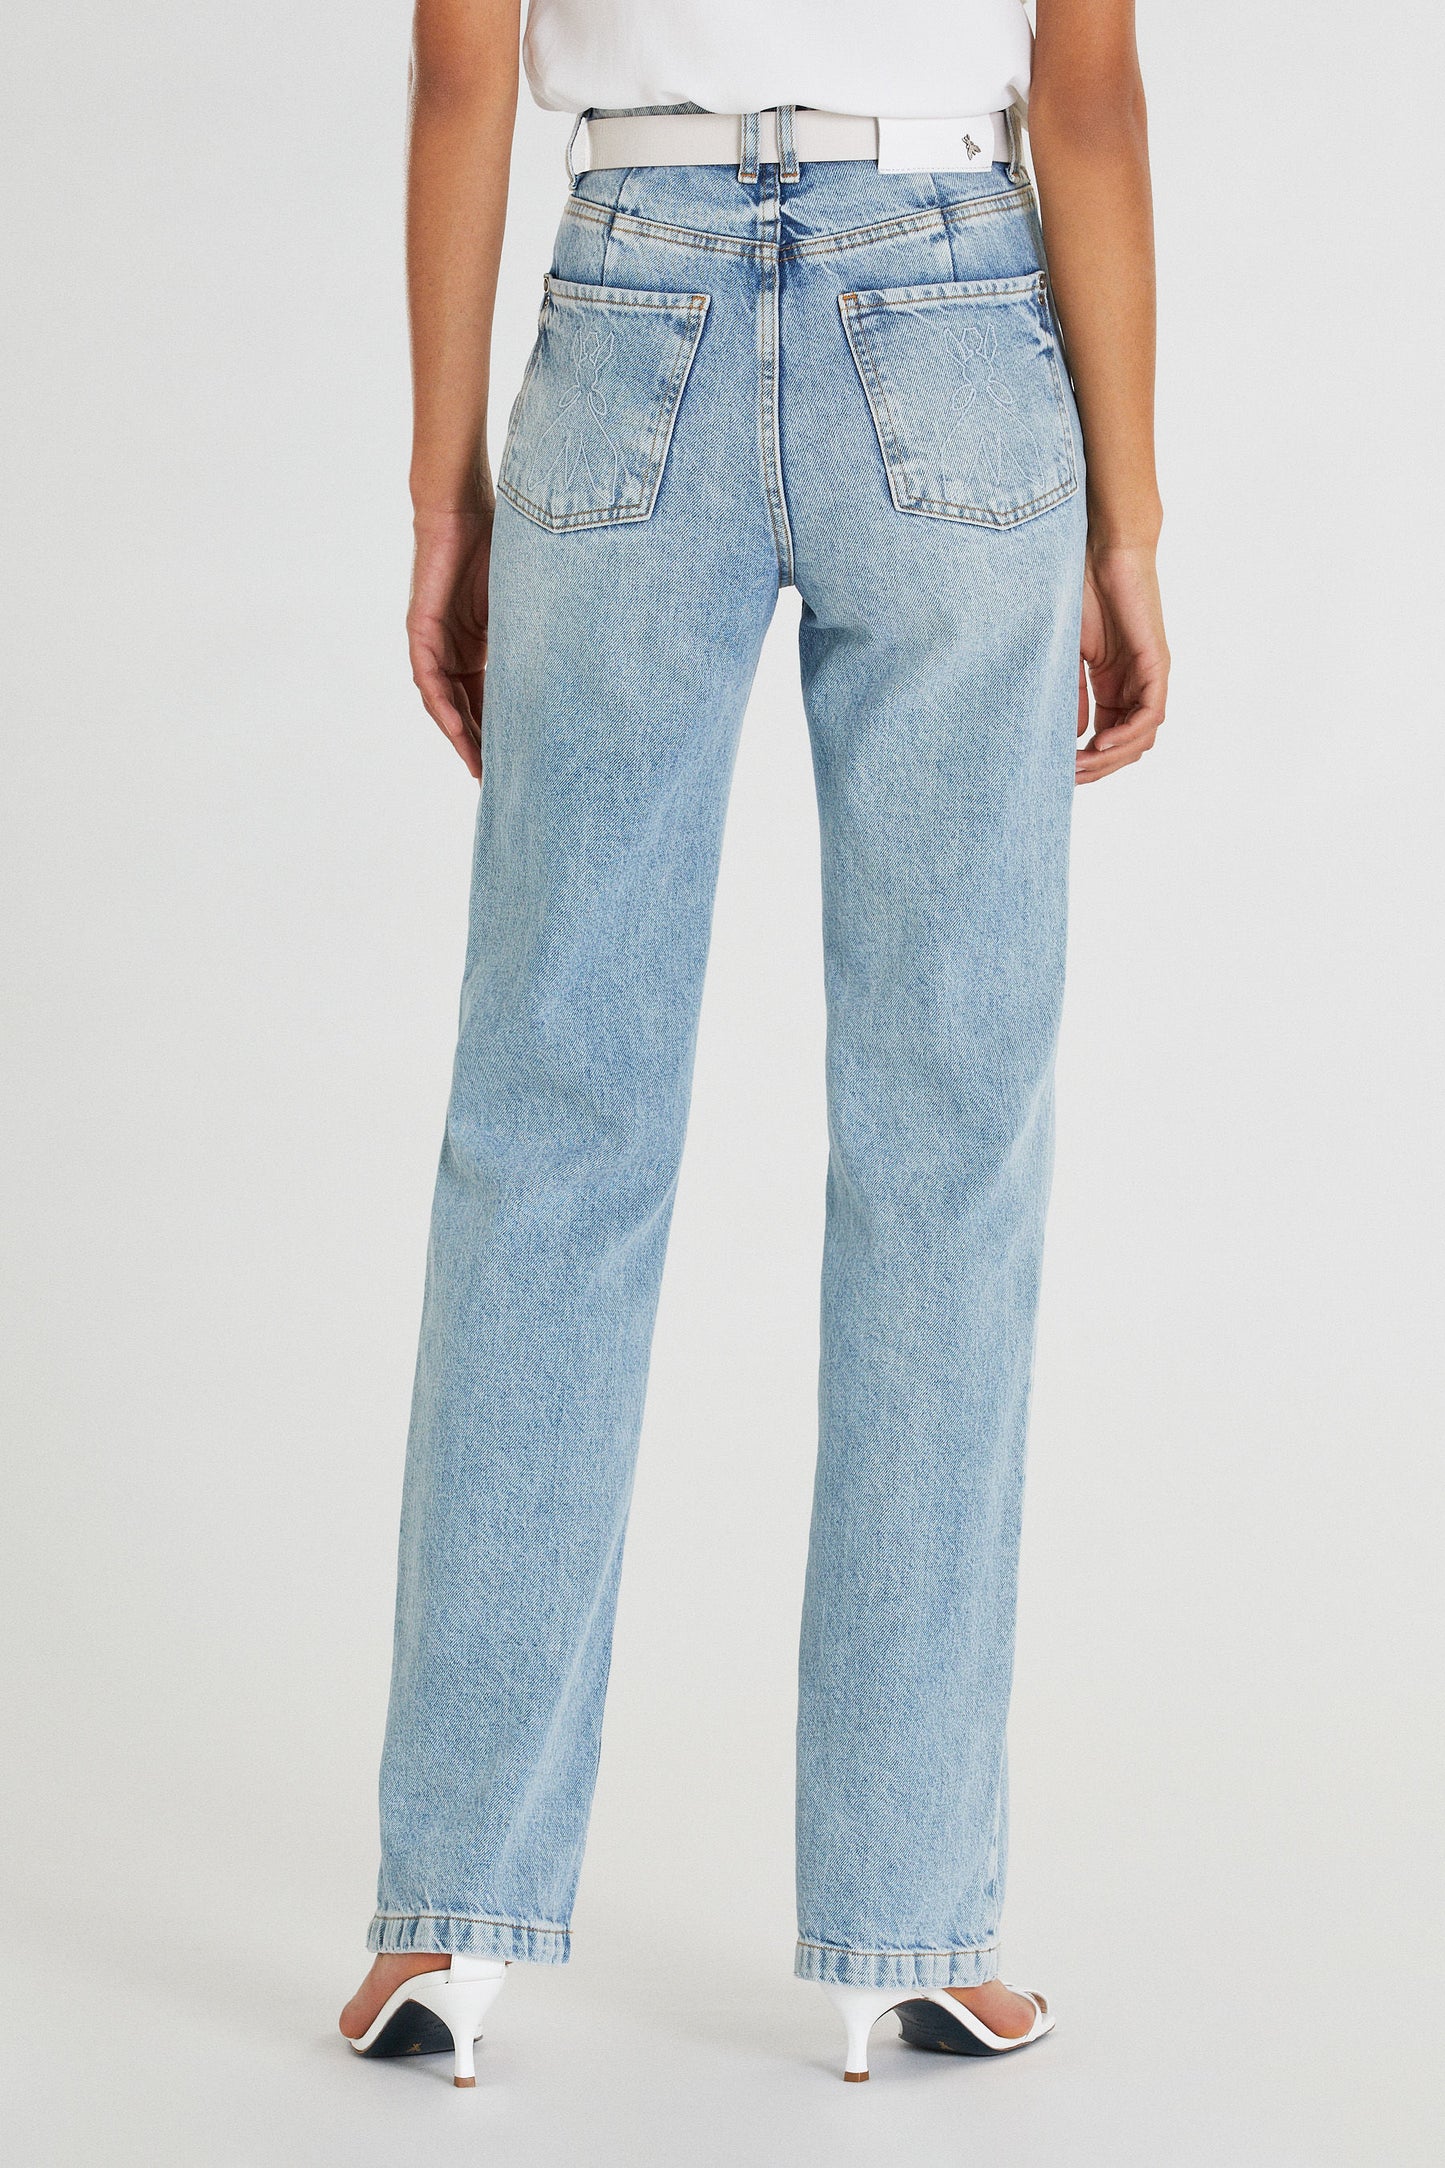 Essential Relaxed Fit Light Wash Jean